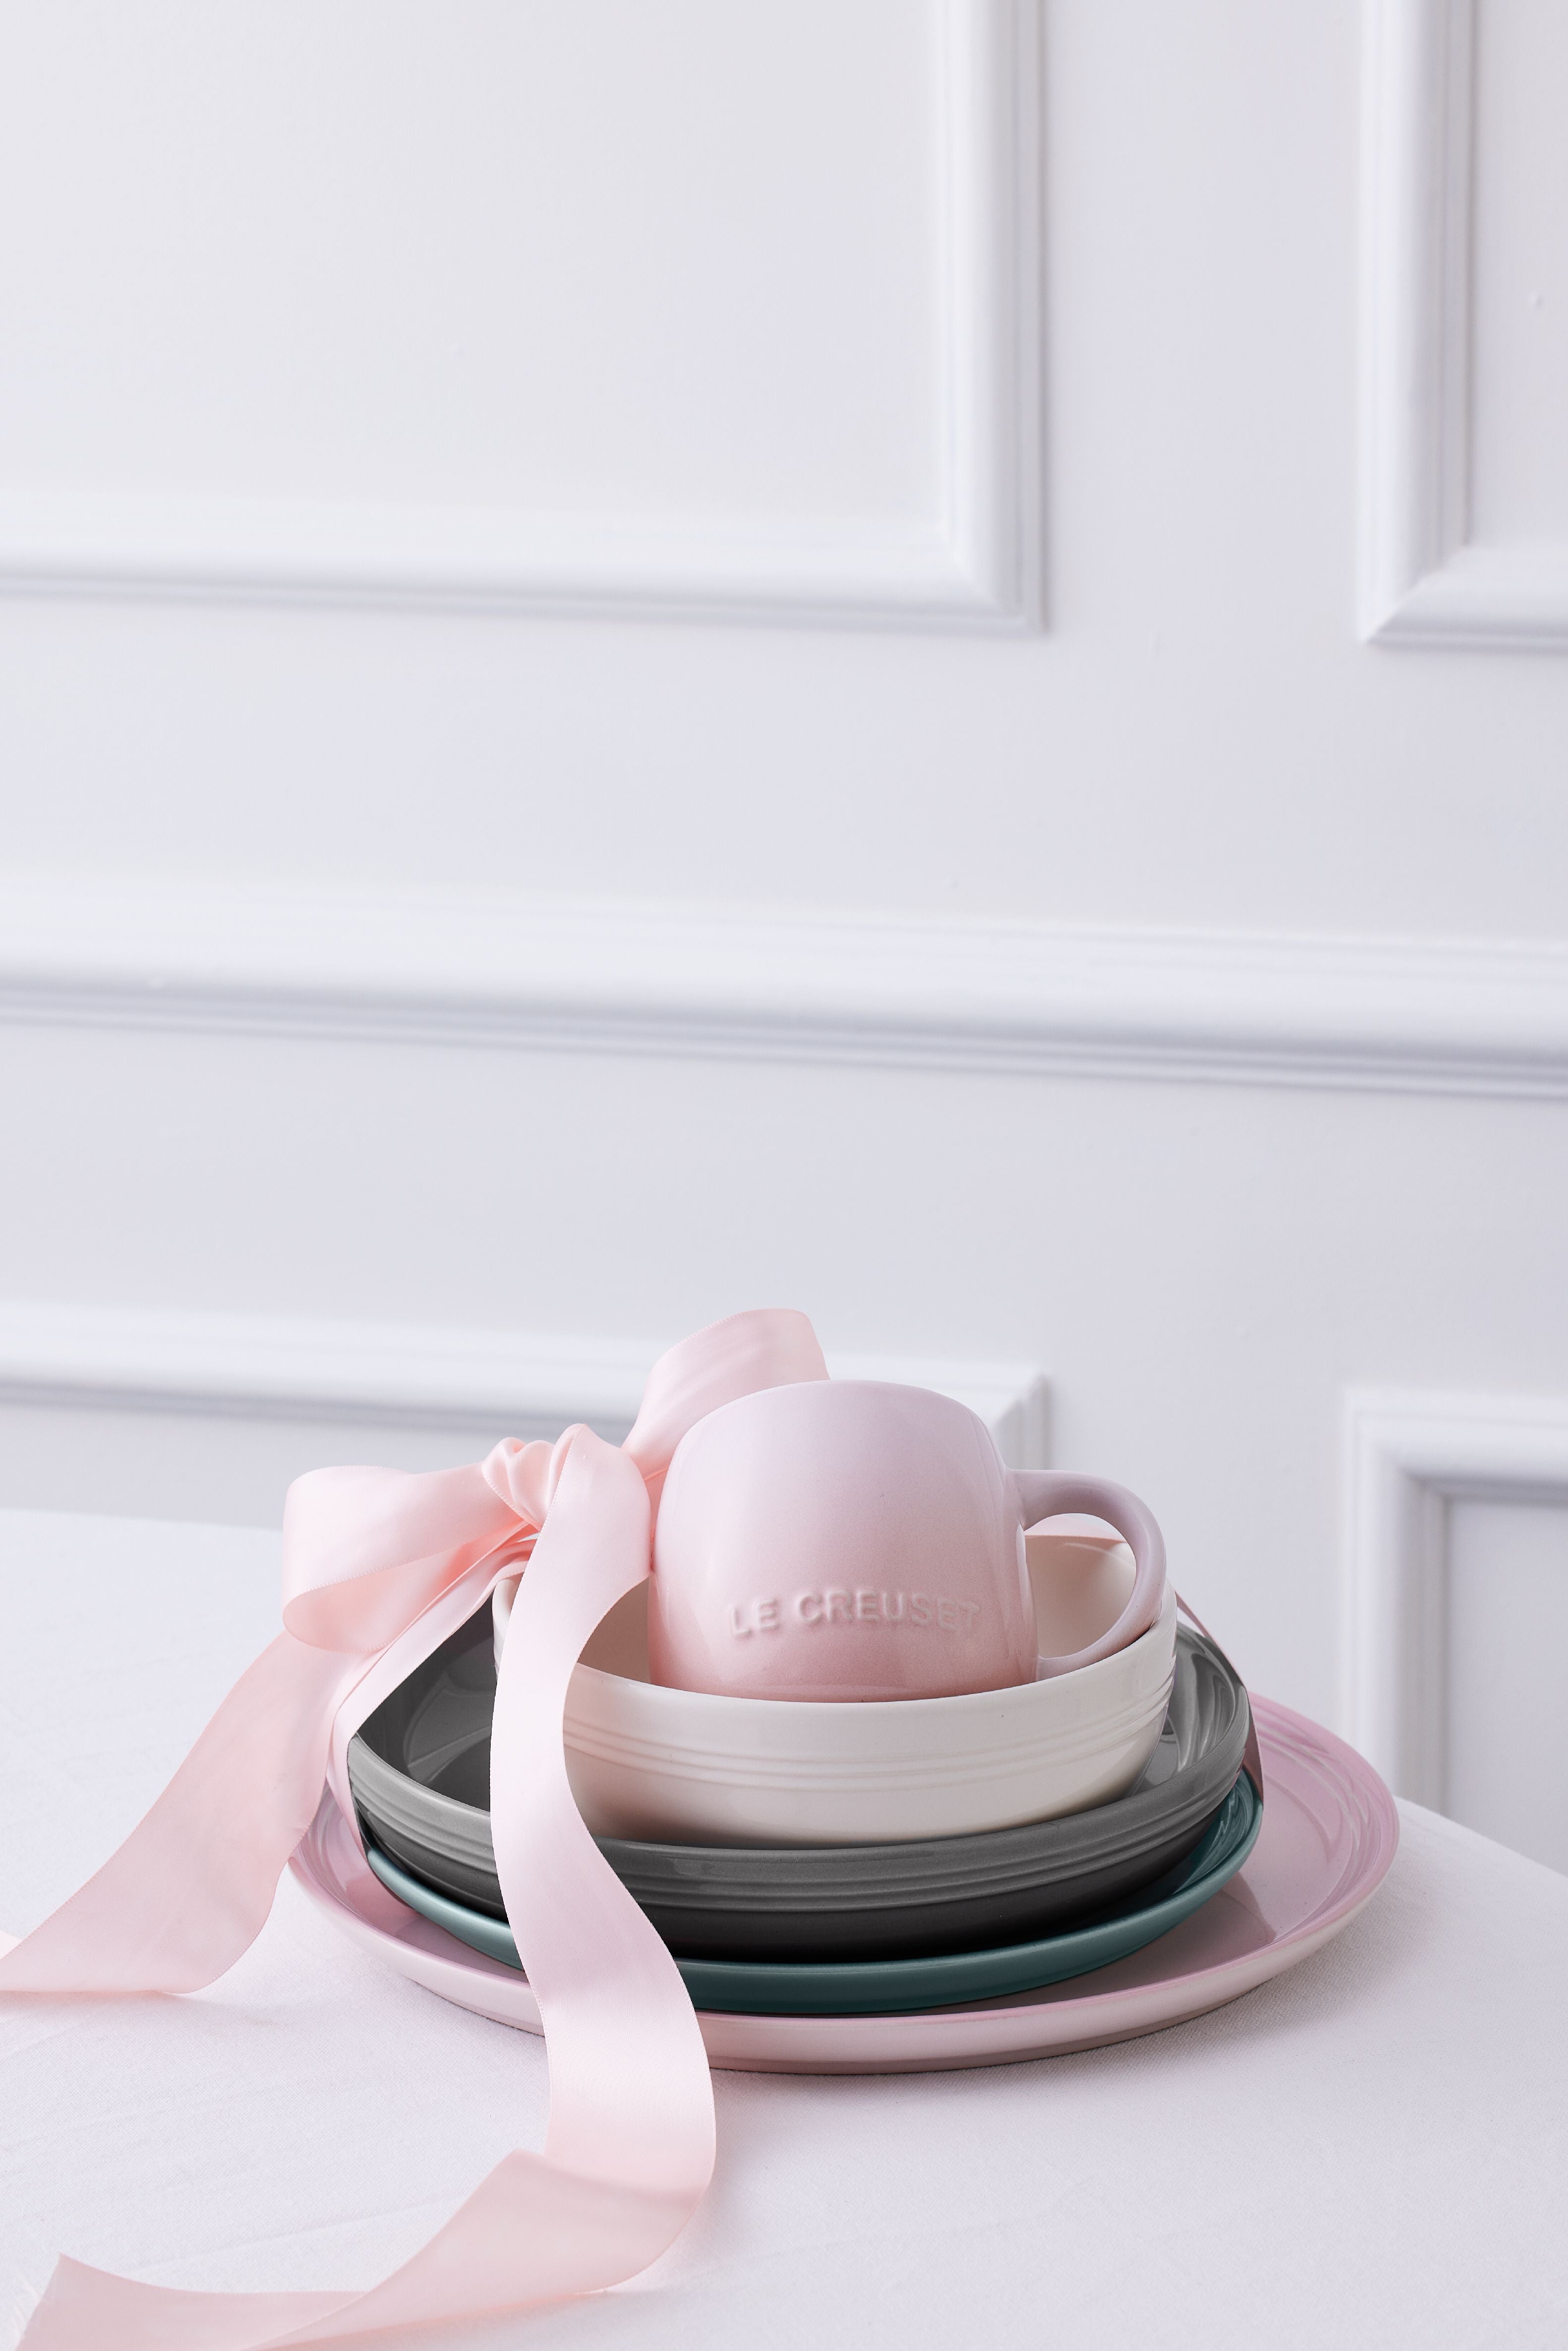 Le creuset coupe krus, shell pink